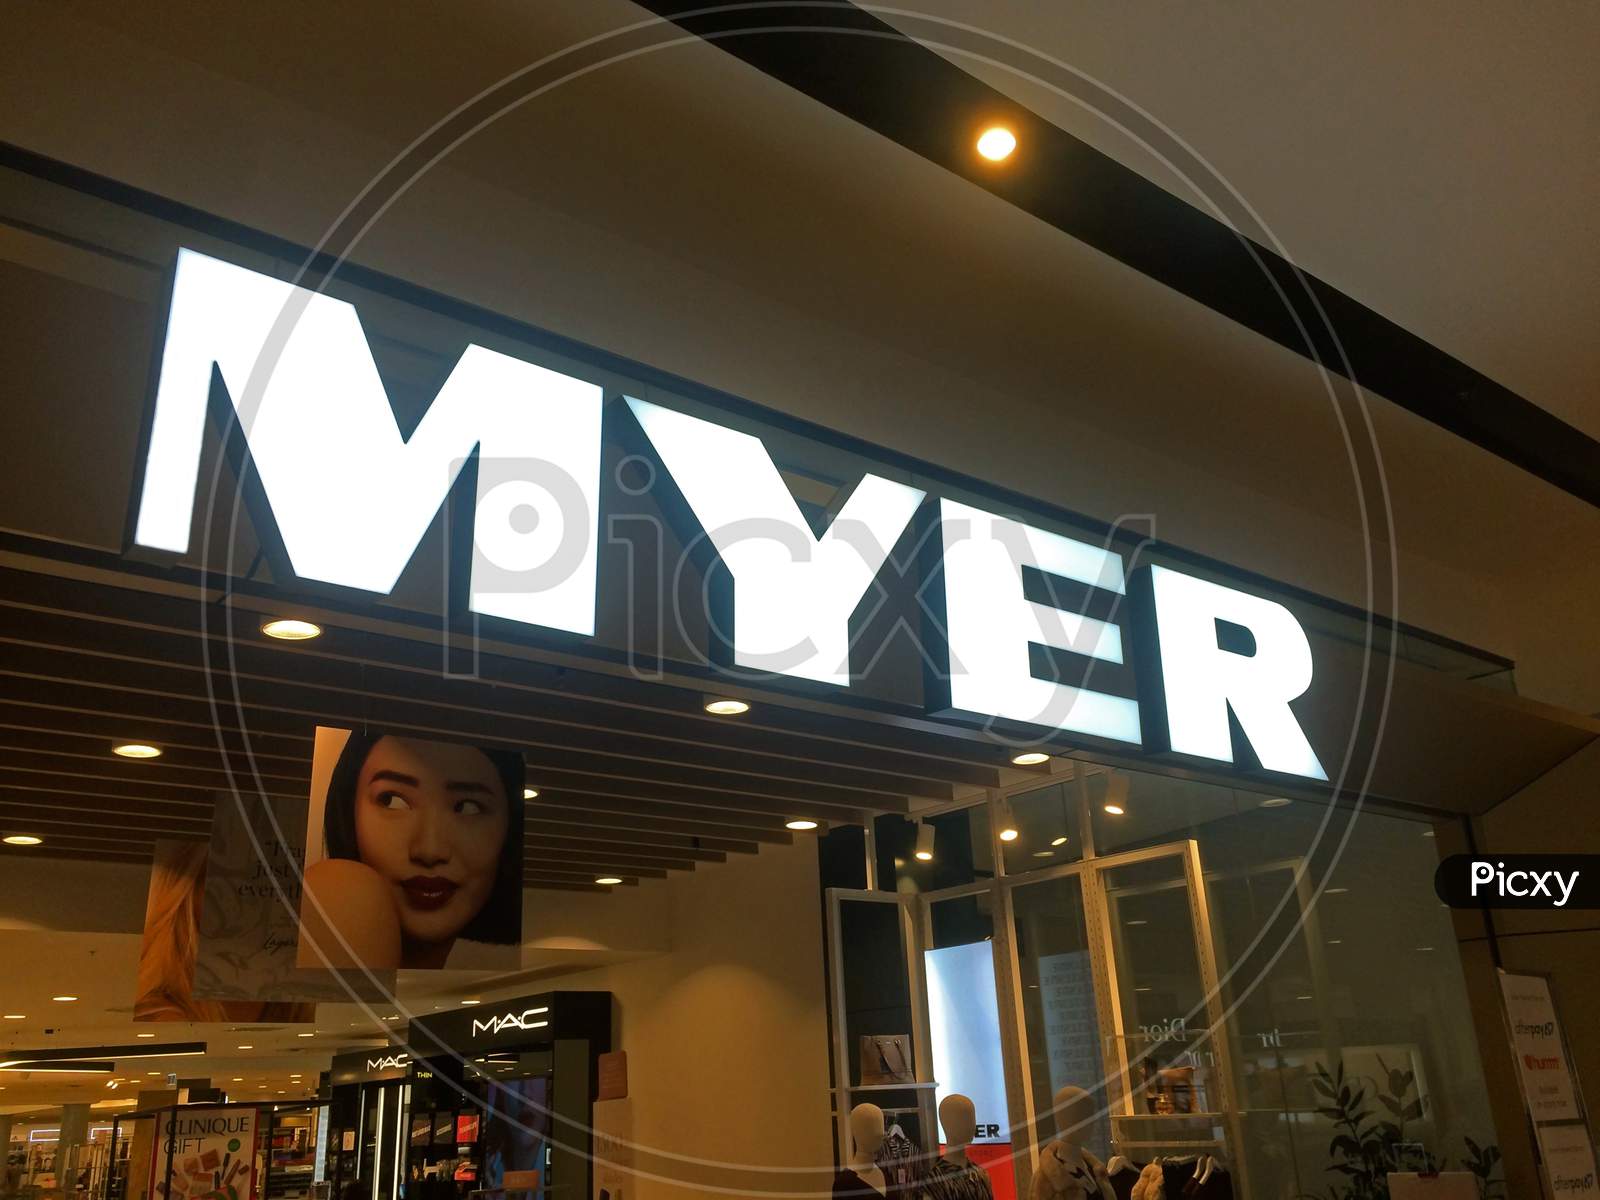 Illuminated Myer Store Sign In Moorachydore